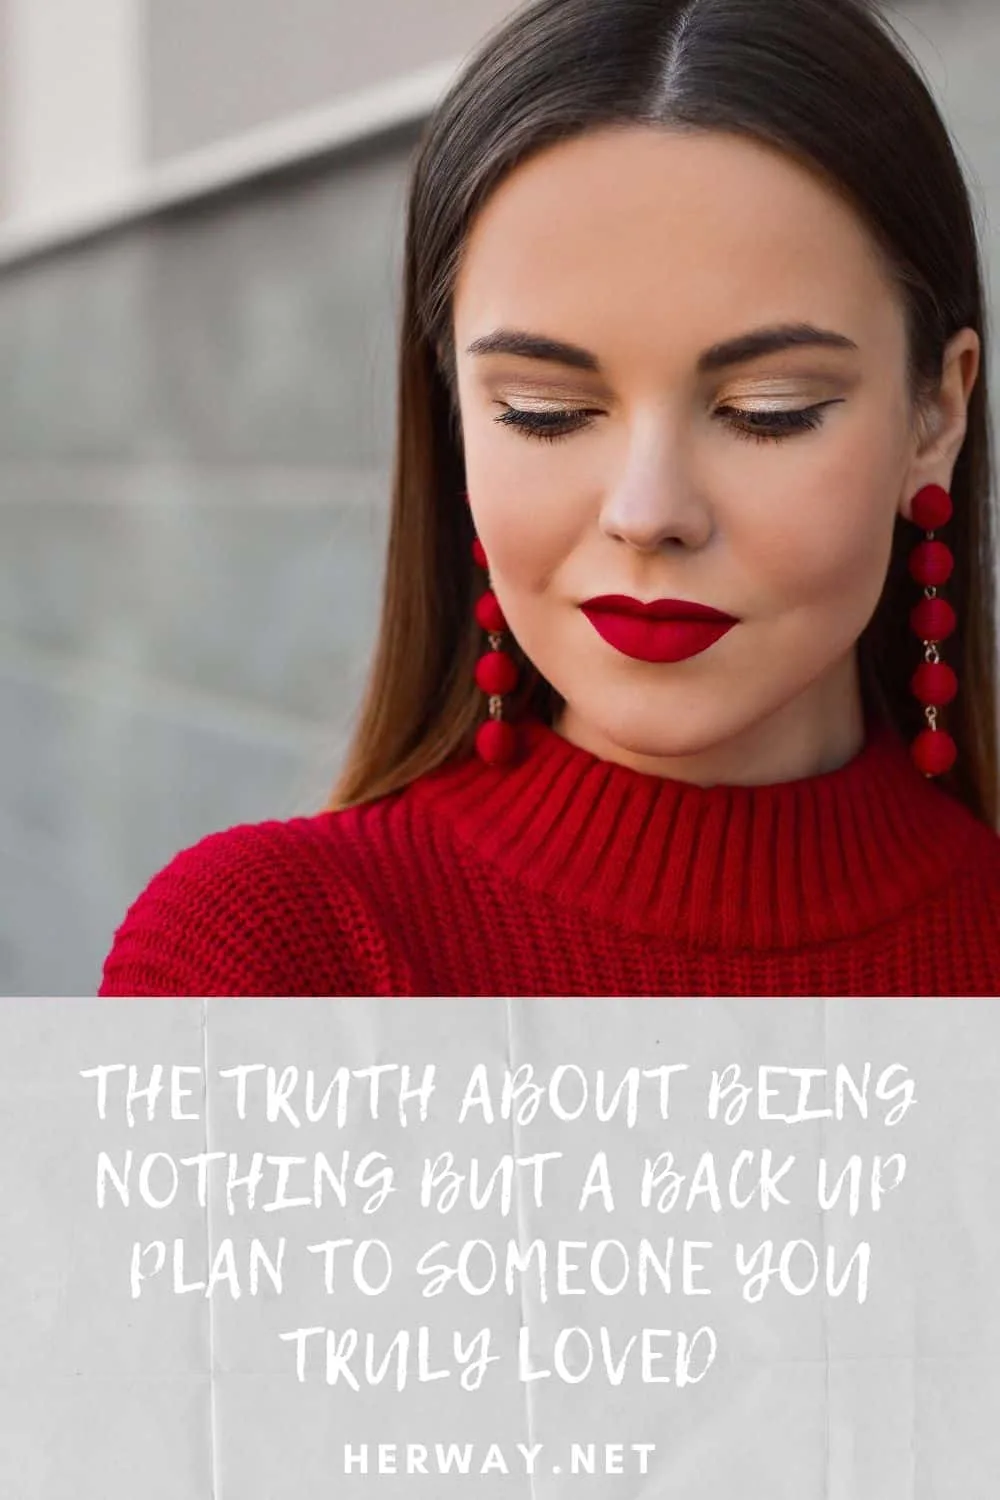 THE TRUTH ABOUT BEING NOTHING BUT A BACK UP PLAN TO SOMEONE YOU TRULY LOVED